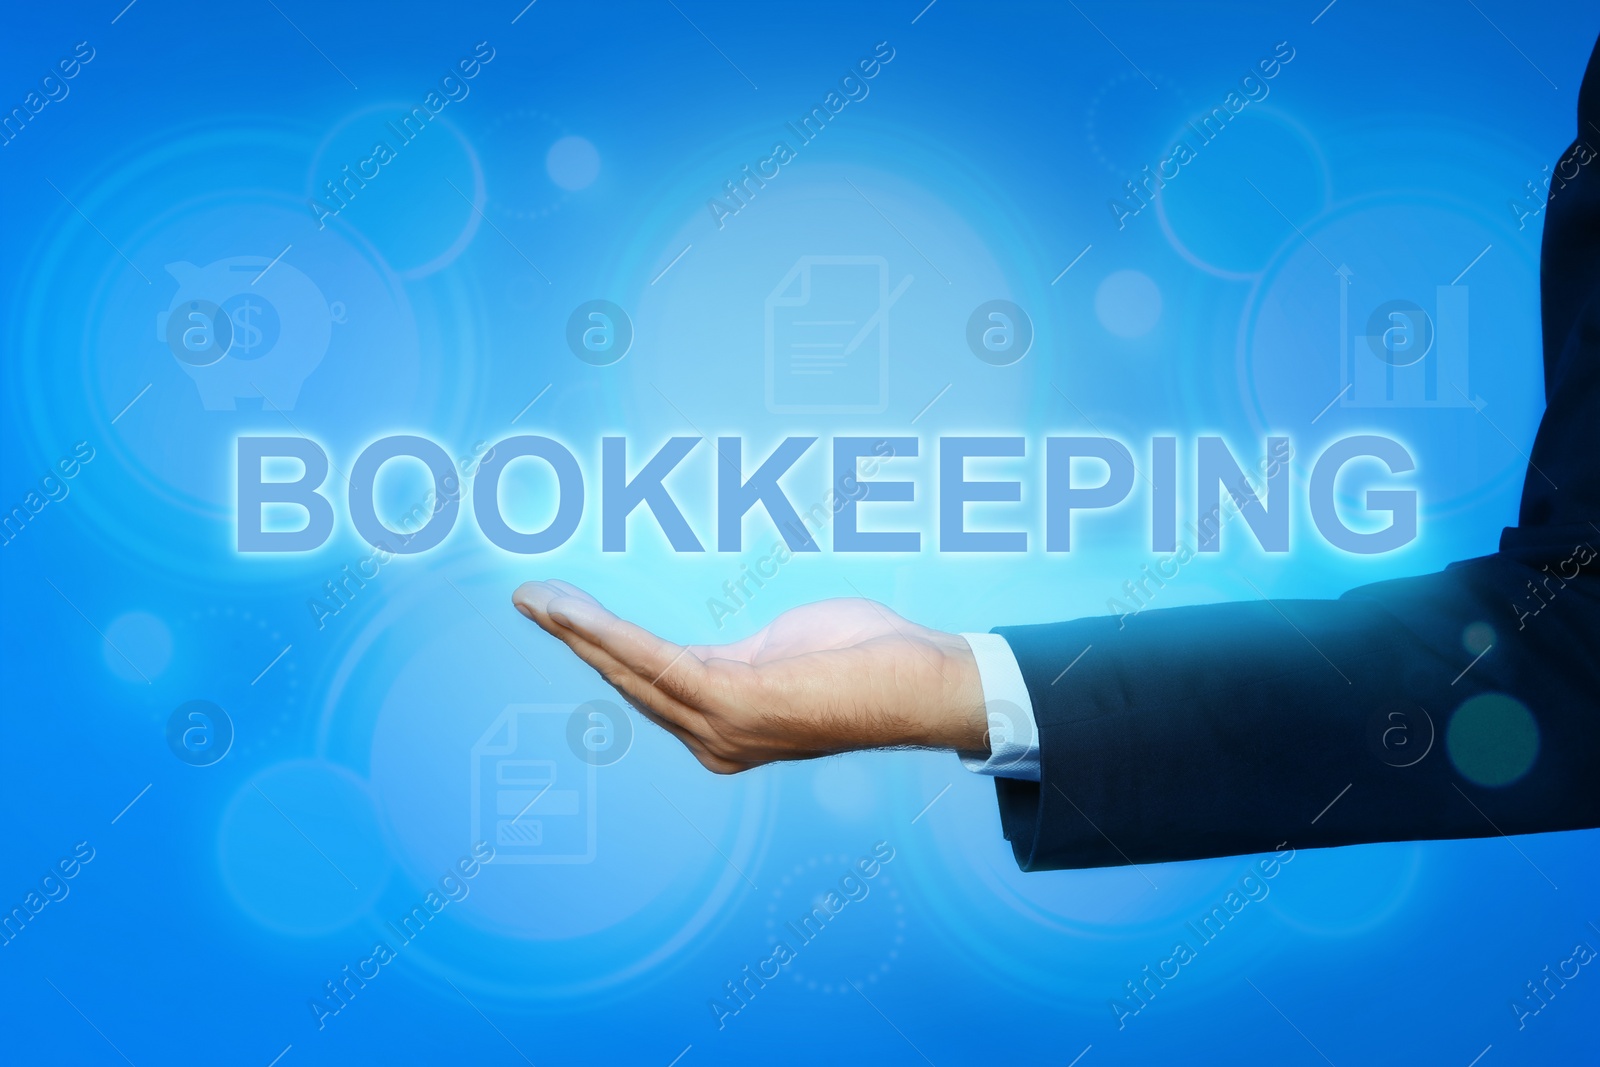 Image of Bookkeeping concept. Businessman holding word on light blue background with digital icons, closeup